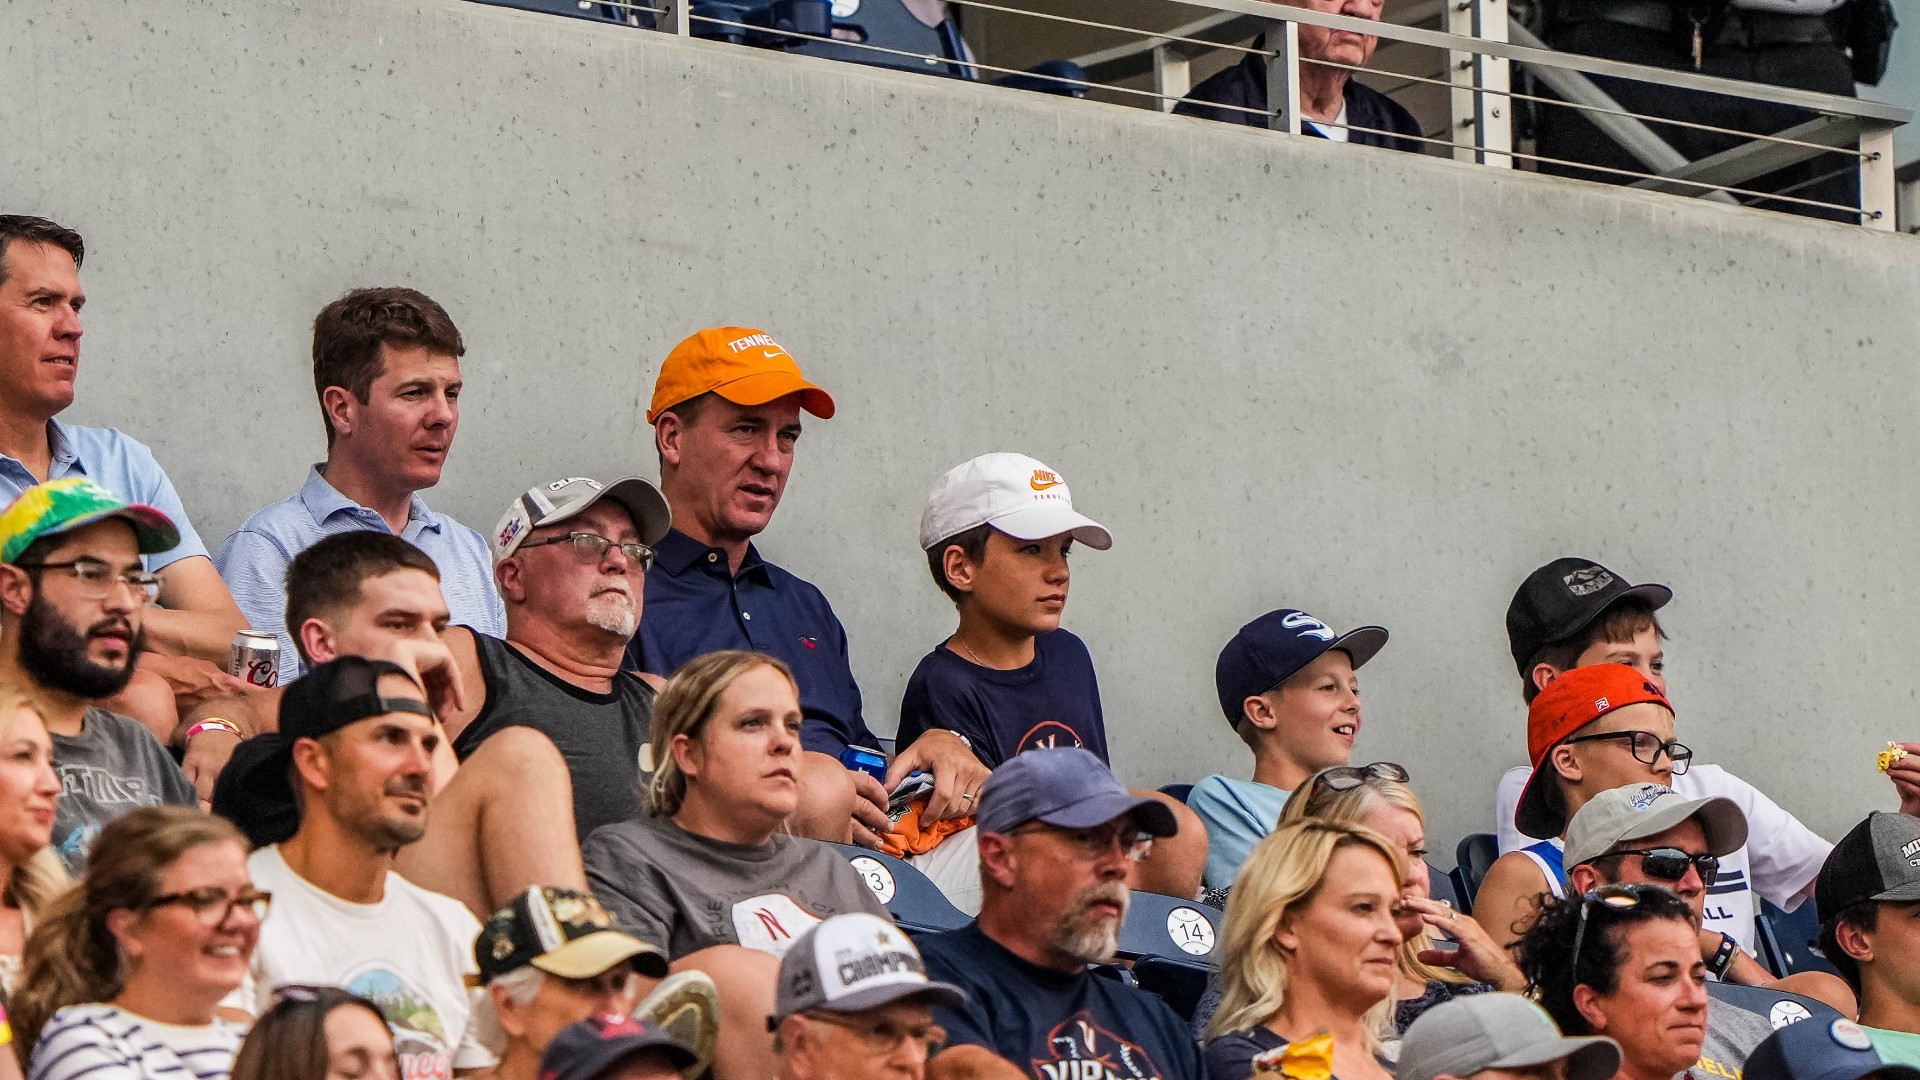 Peyton Manning attending the College World Series